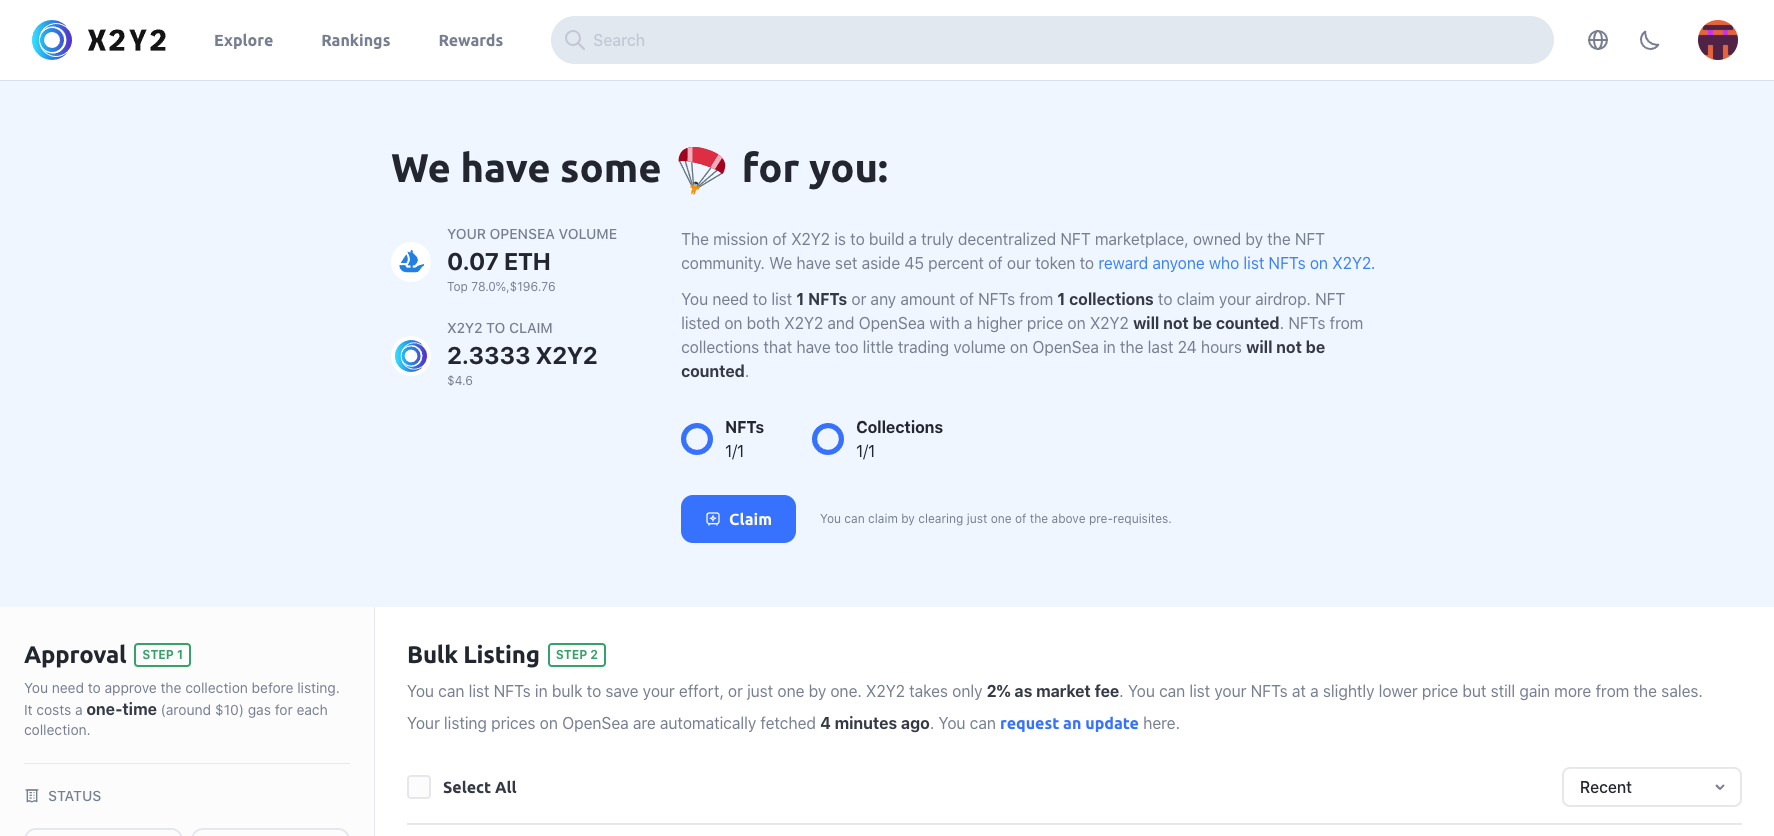 A new X2Y2 NFT marketplace is airdropping its tokens to OpenSea users